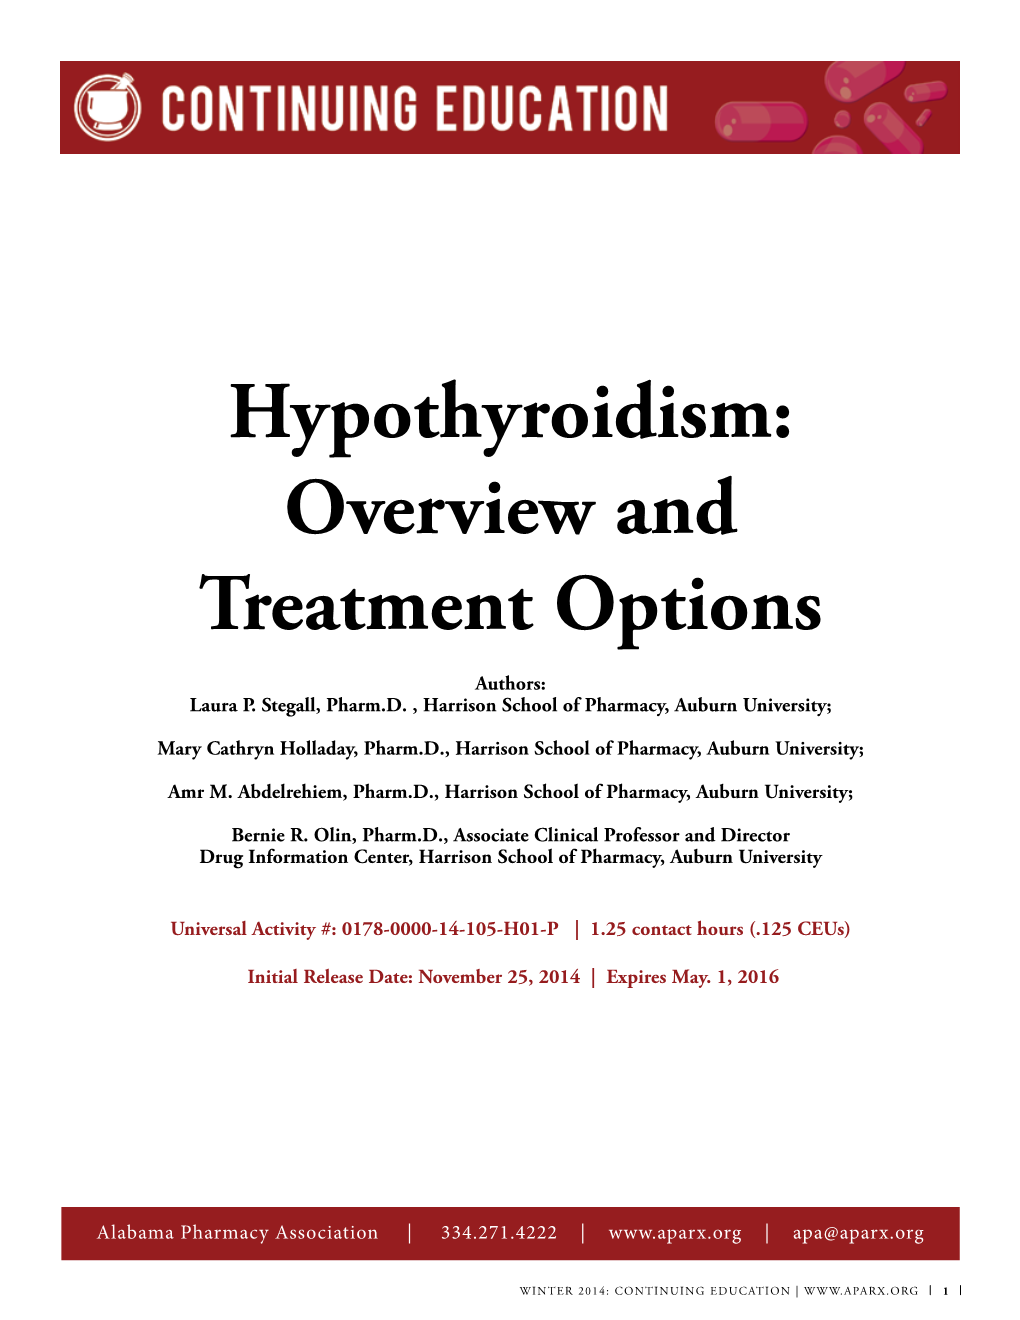 Hypothyroidism: Overview and Treatment Options